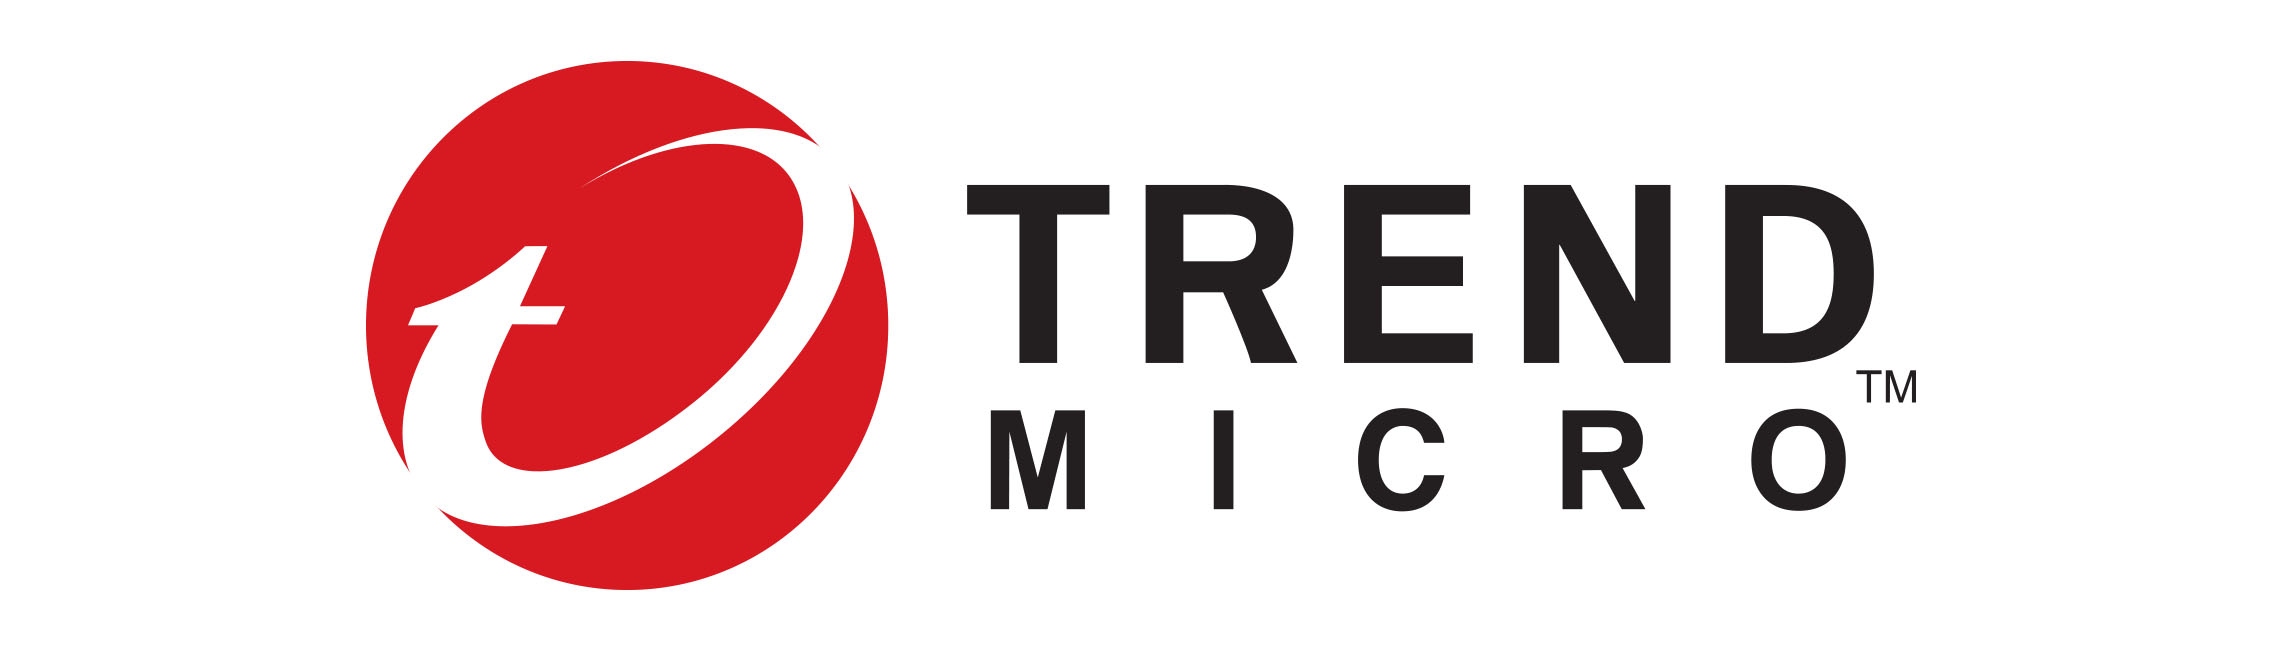 trend micro free download